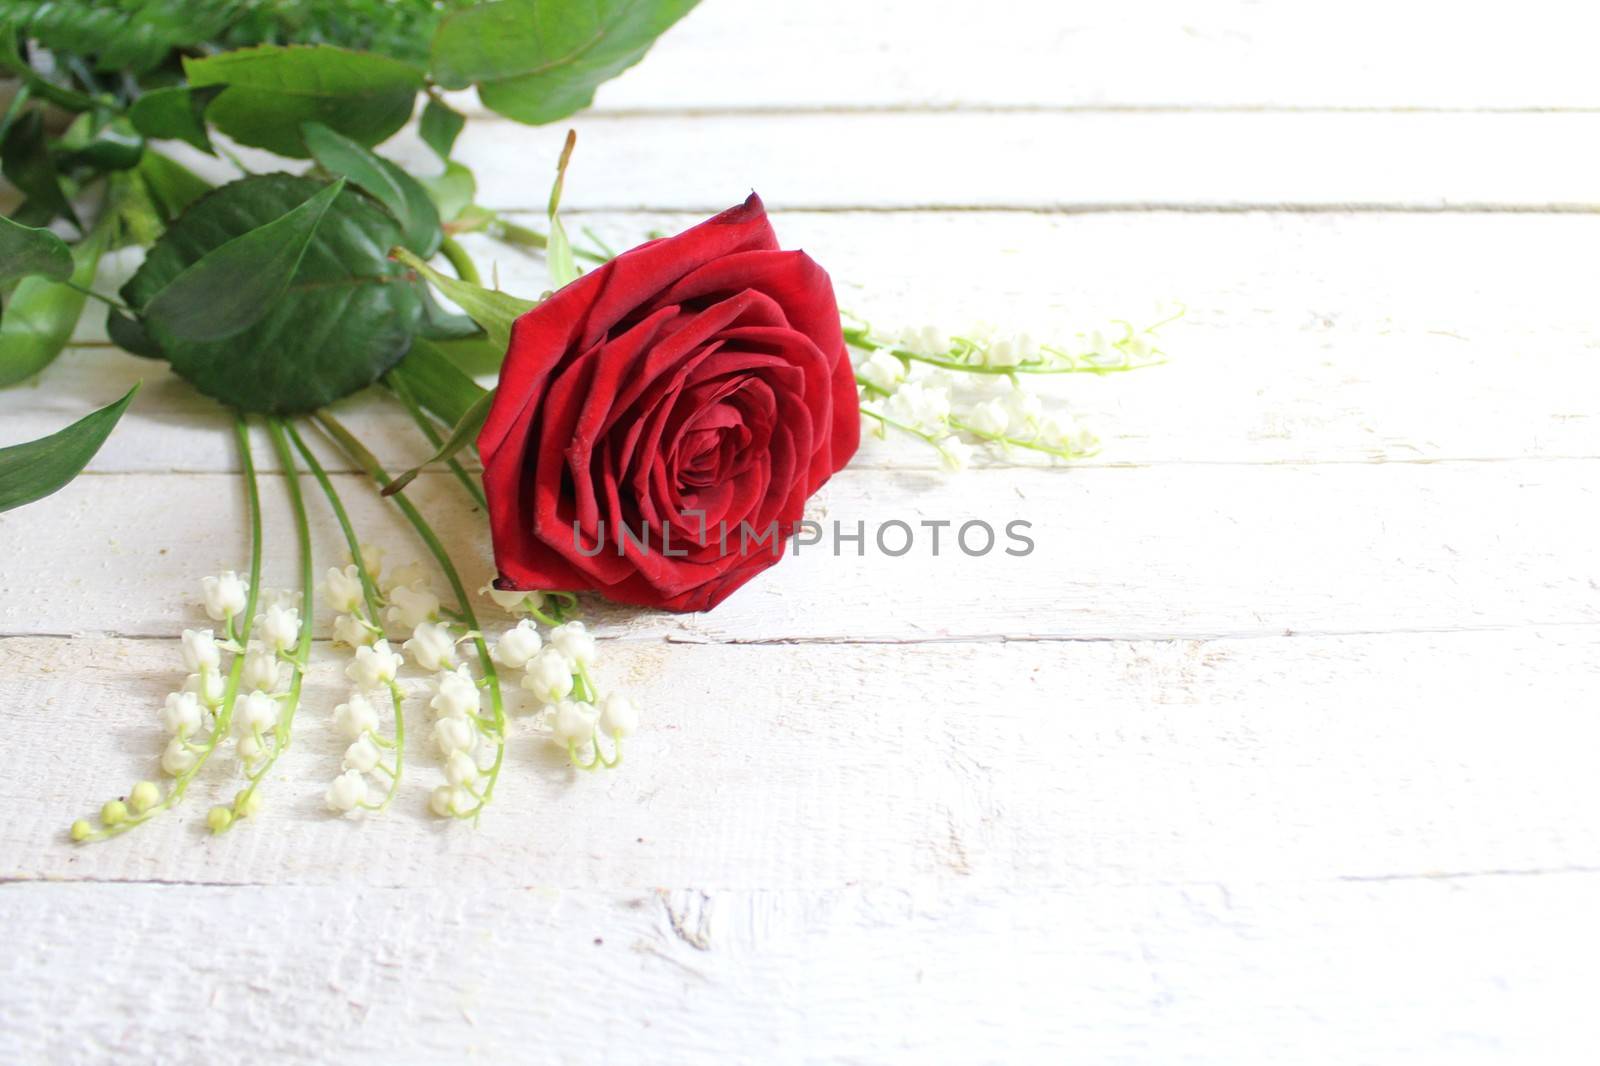 red rose and lily of the valley by martina_unbehauen